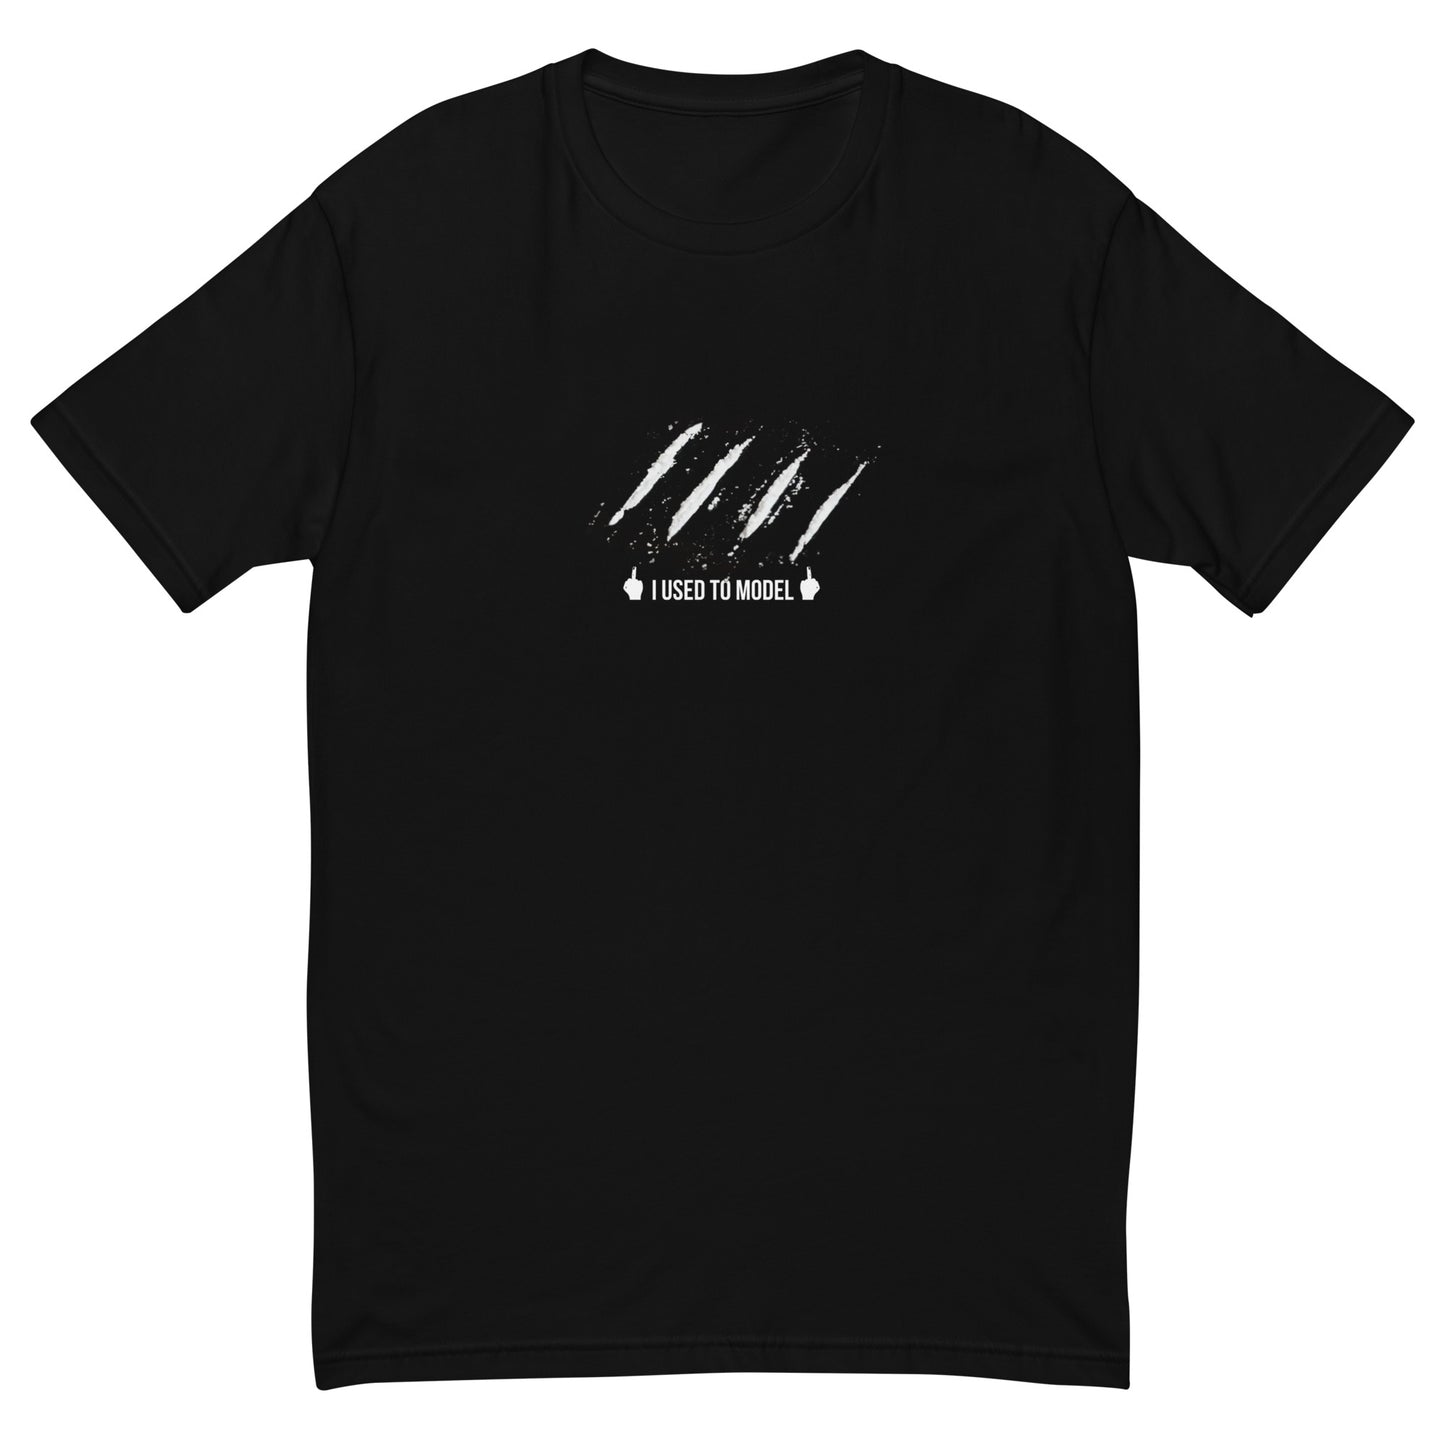 WALTER - Fitted Short Sleeve T-shirt